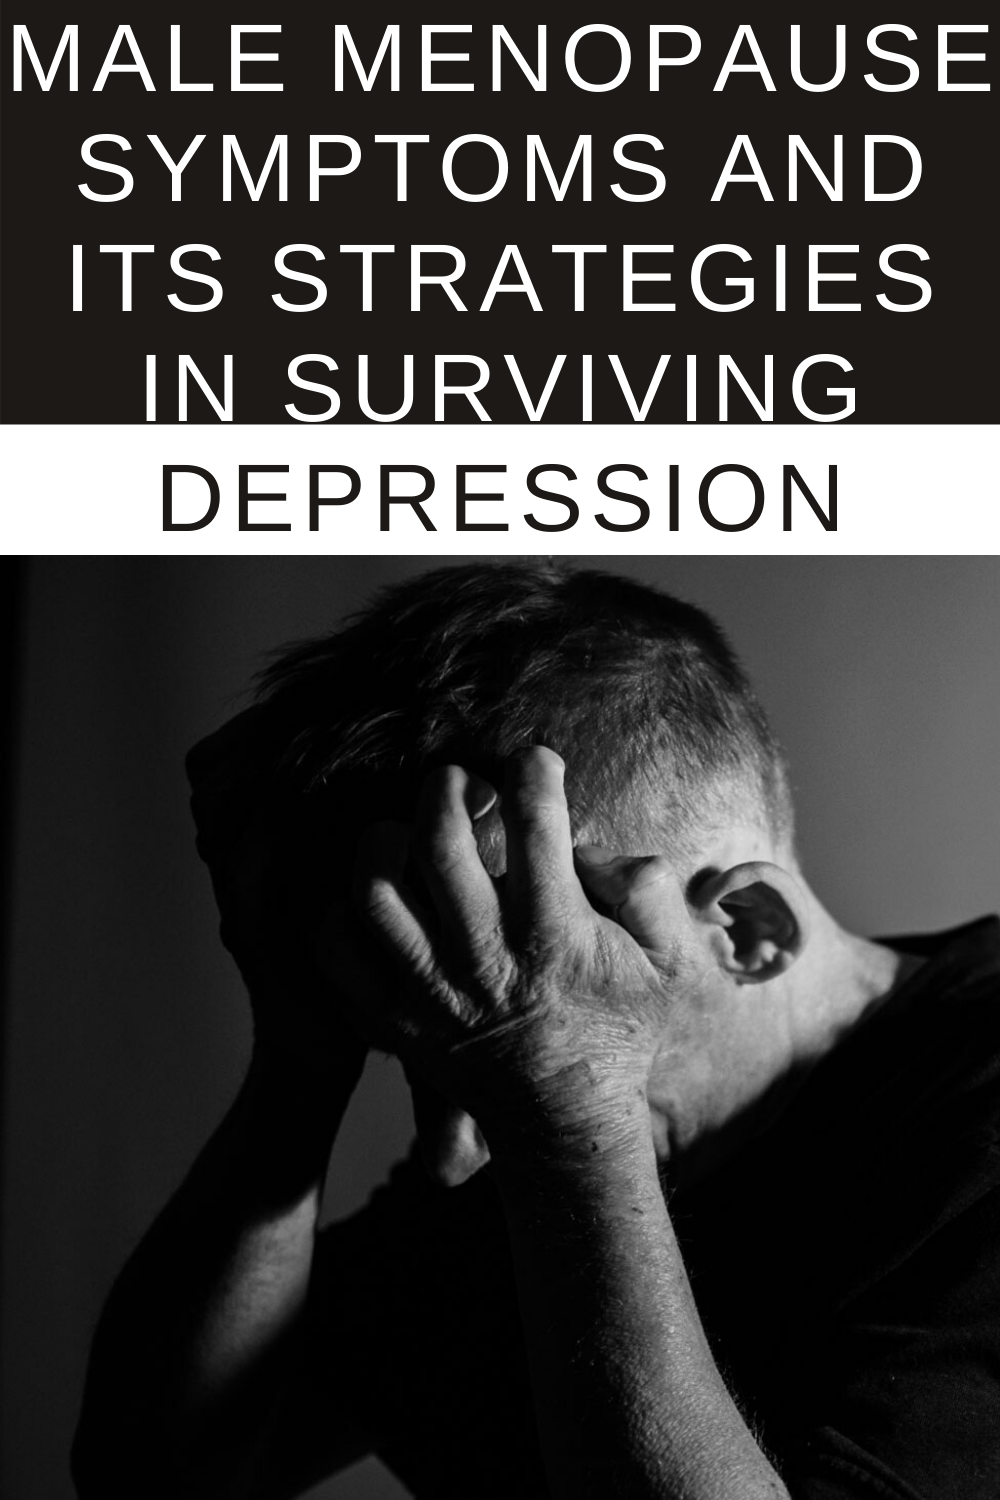 Male Menopause Symptoms and Its Strategies in Surviving Depression